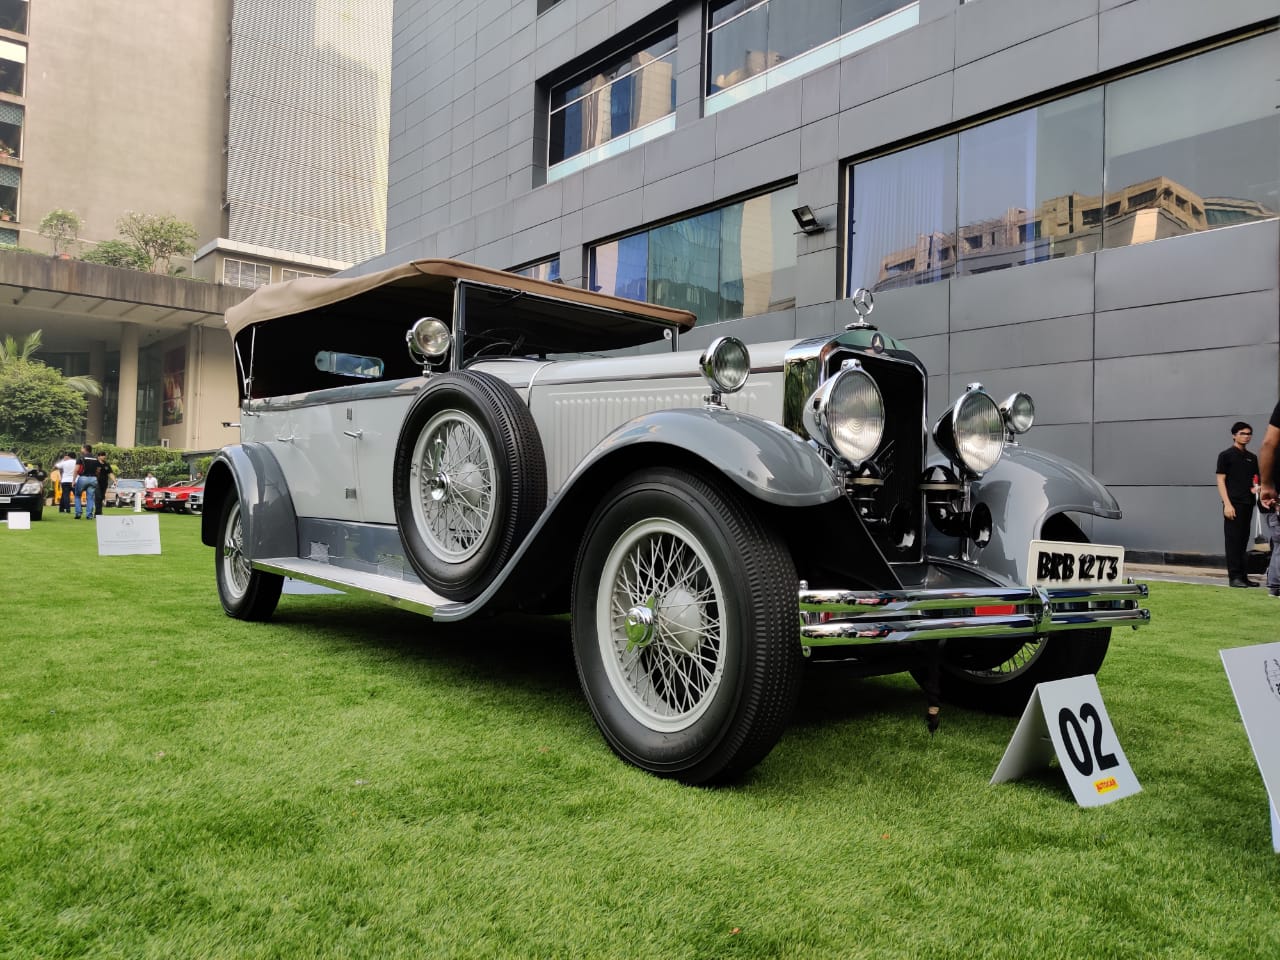 This priceless Mercedes Nurburg is one of few in the world